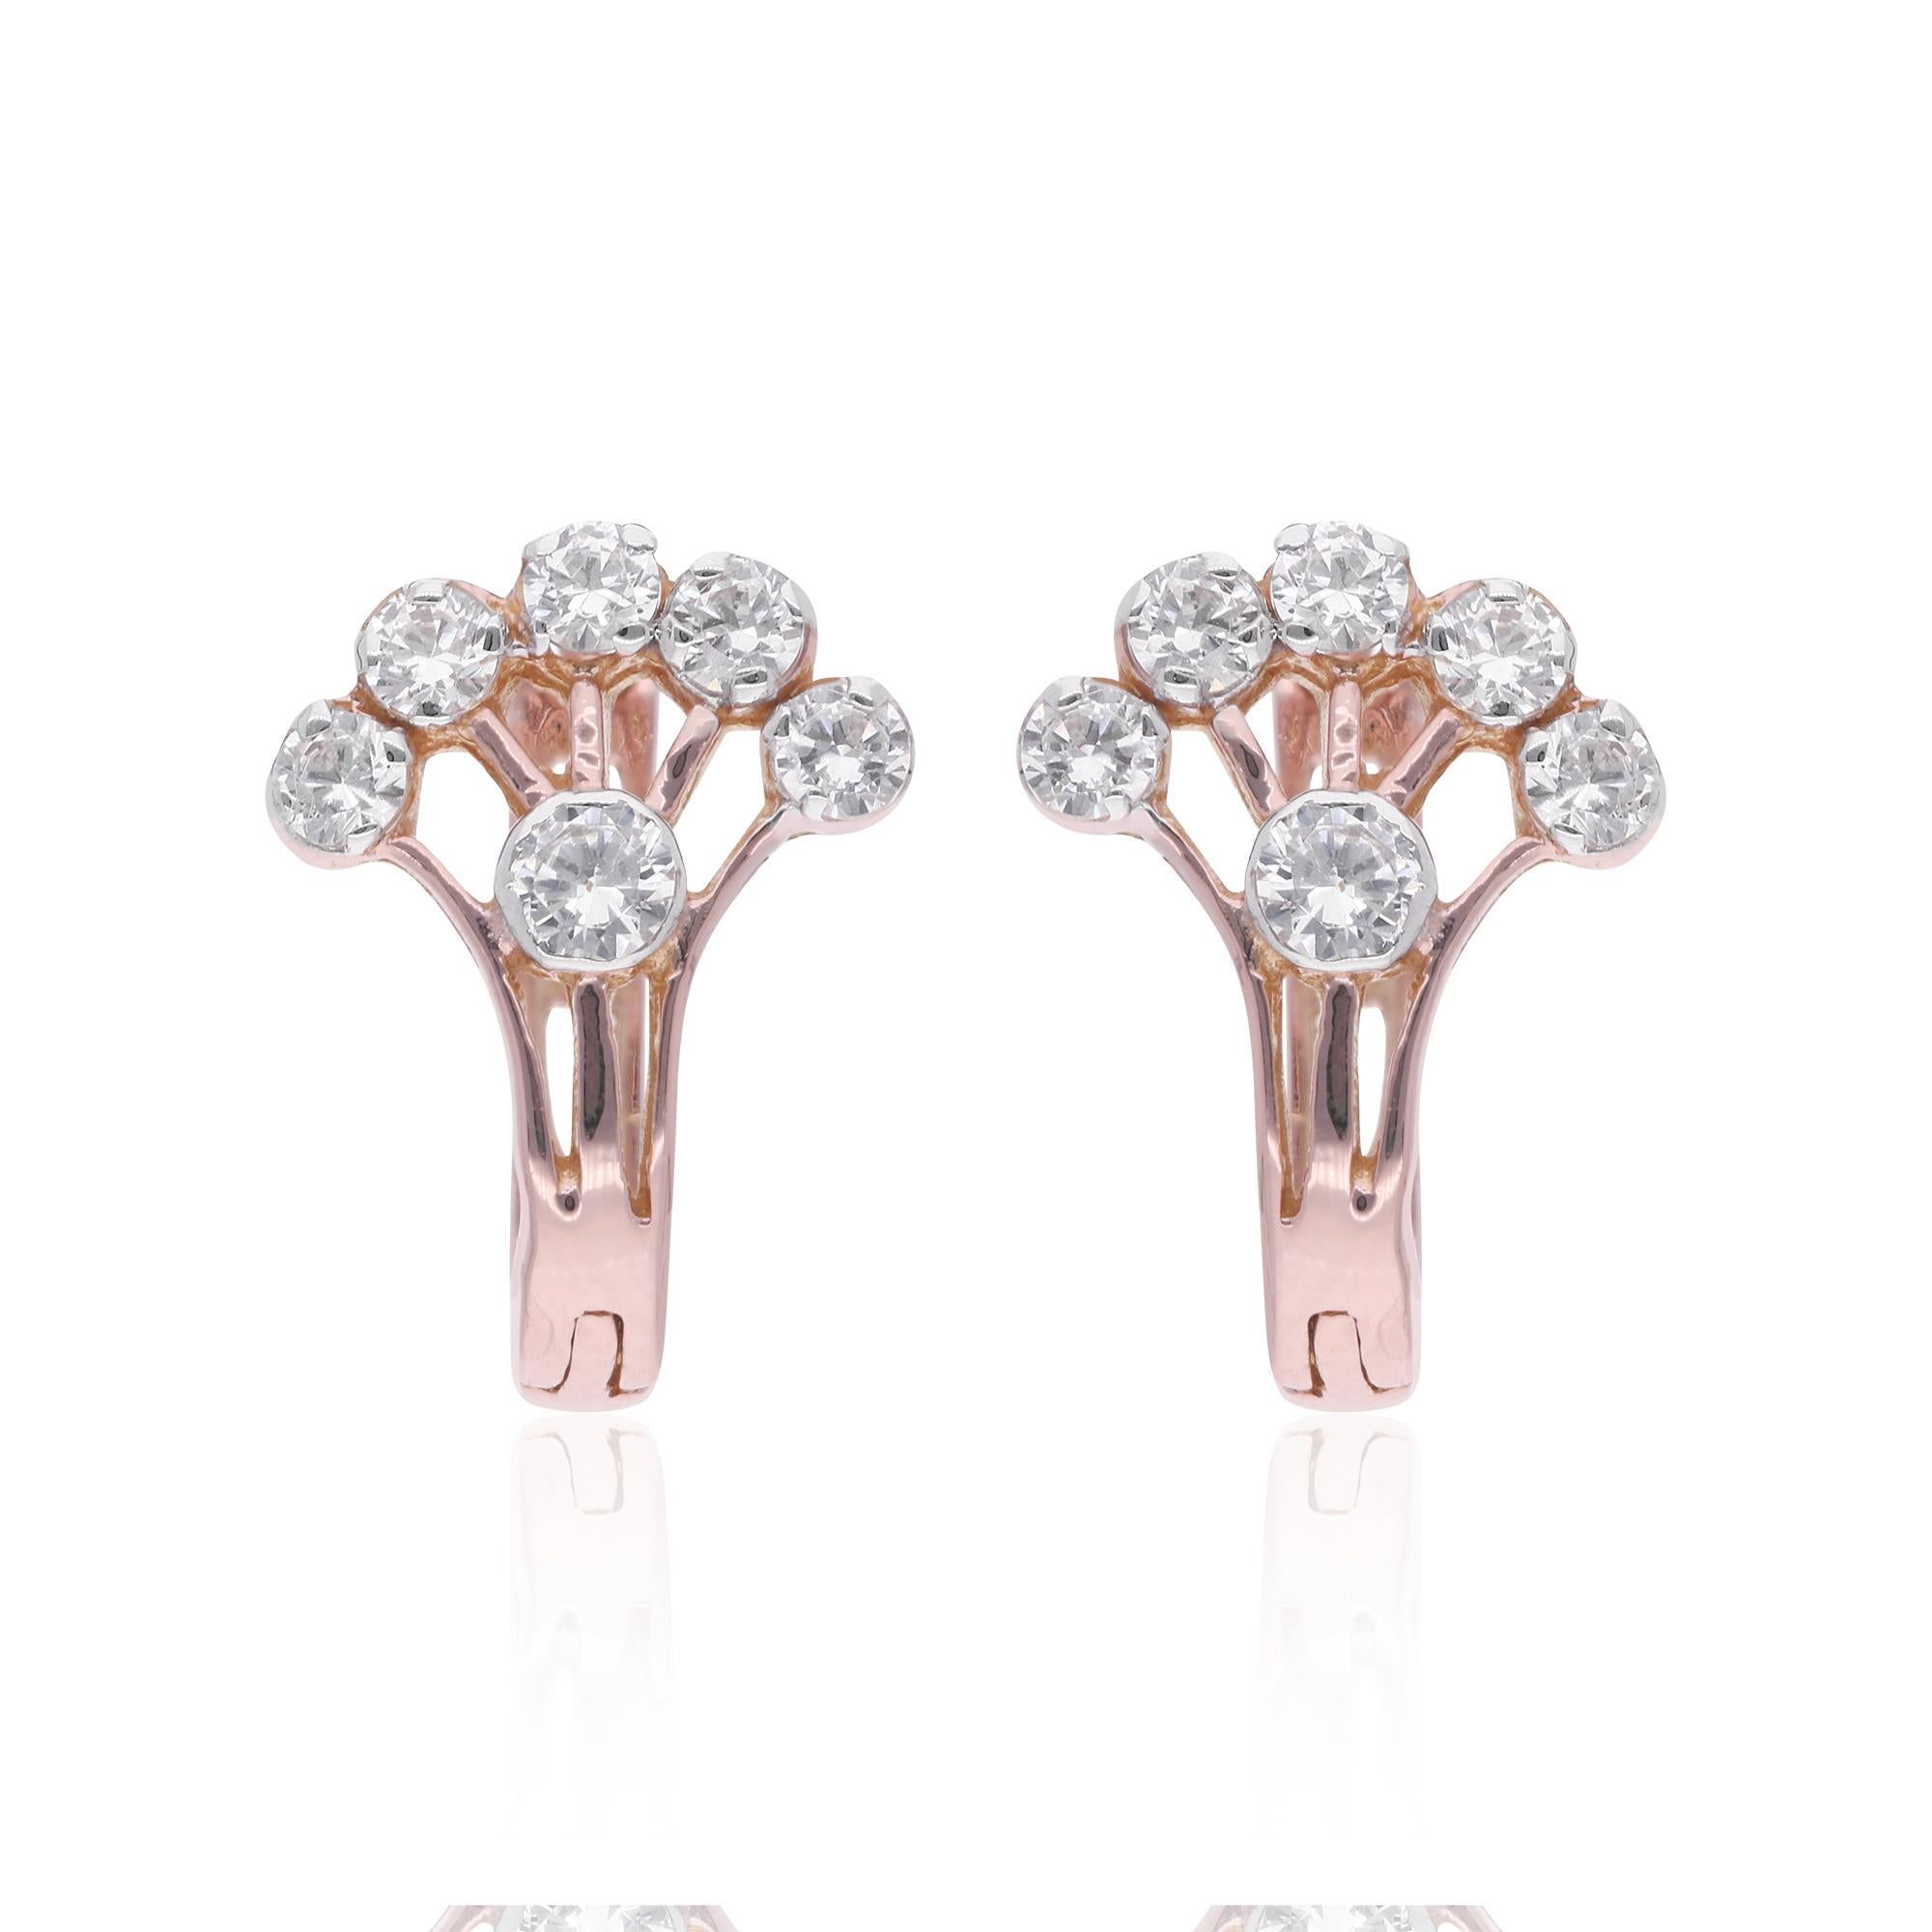 Item Code :- CN-16949
Gross Wt. :- 1.60 gm
18k Rose Gold Wt. :- 1.56 gm
Natural Diamond Wt. :- 0.20 Ct. ( AVERAGE DIAMOND CLARITY SI1-SI2 & COLOR H-I )
Earrings Length :- 12 mm approx.

✦ Sizing
.....................
We can adjust most items to fit